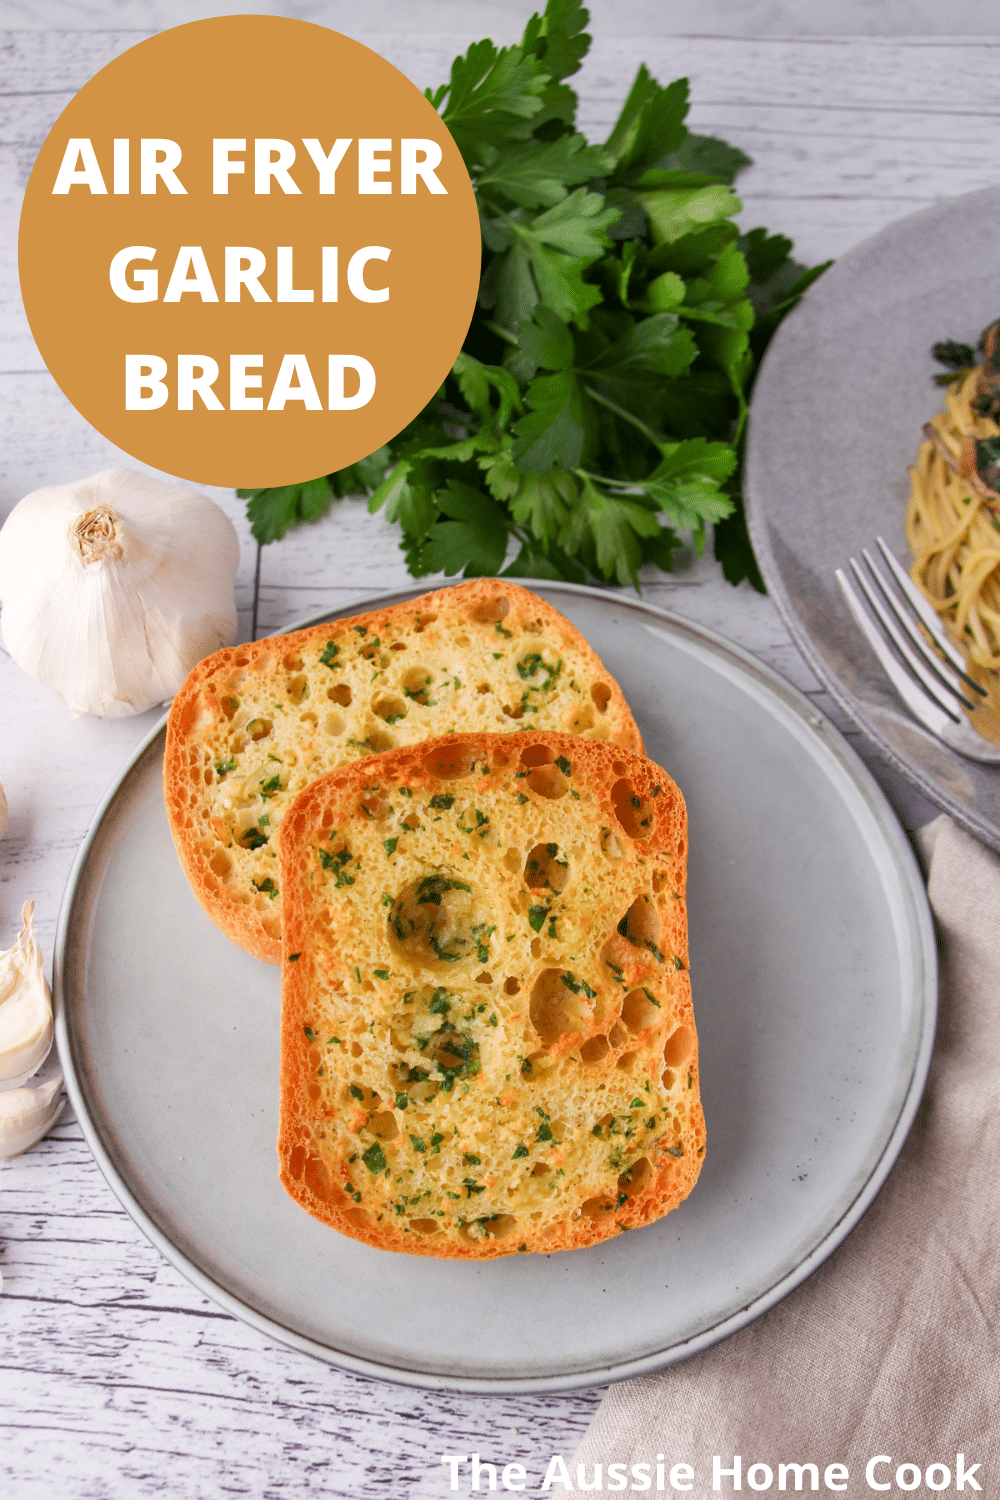 Air fryer garlic bread on a plate, with fresh garlic cloves, fresh parsley and a plate of pasta on the sides, with text overlay, Air fryer garlic bread and The Aussie Home Cook.